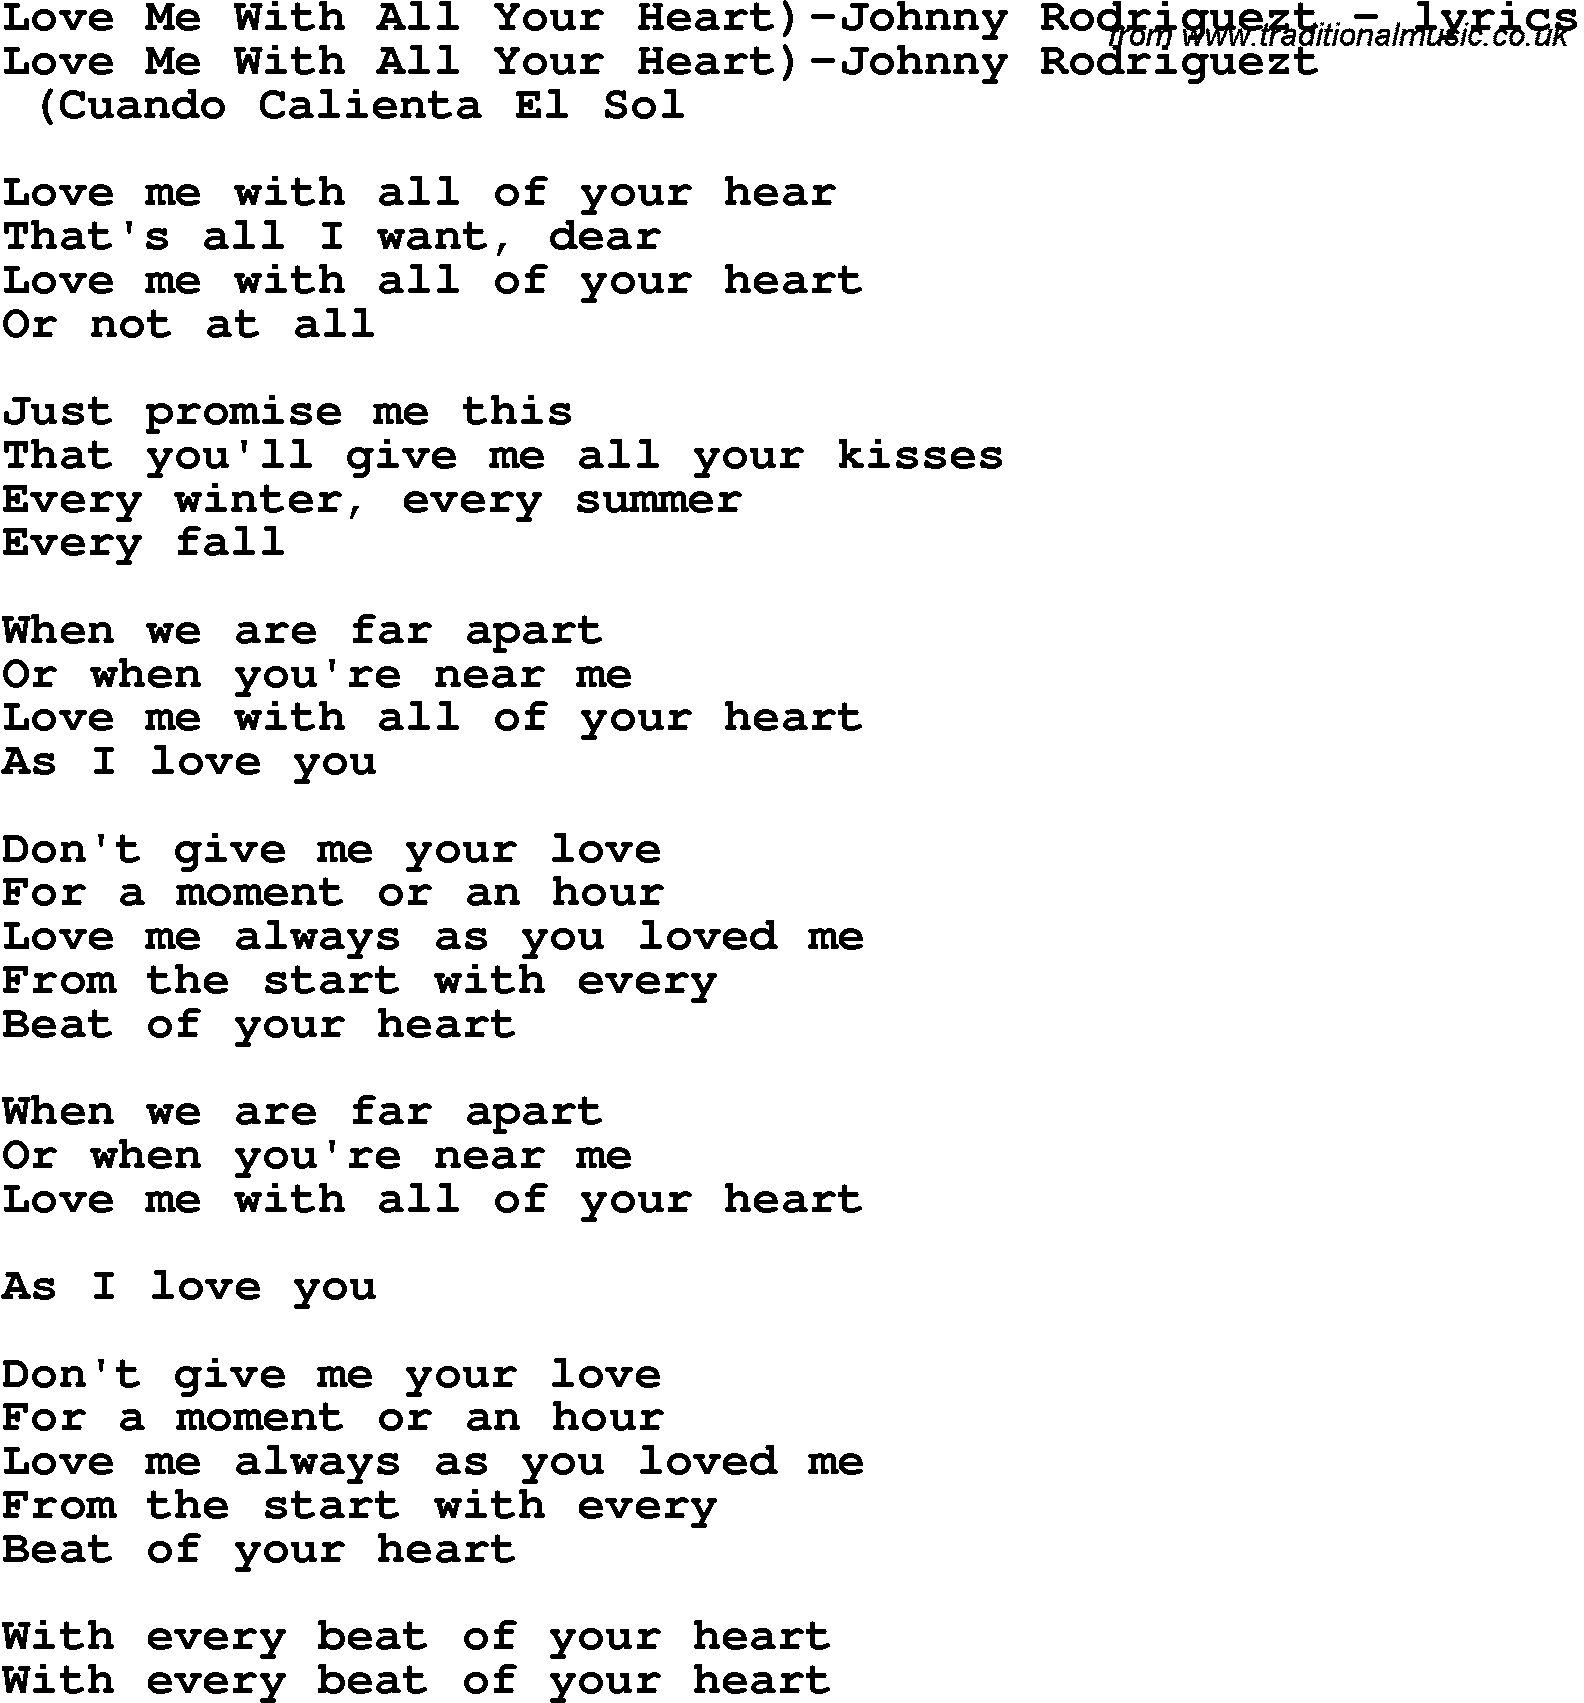 Love Song Lyrics for: Love Me With All Your Heart)-Johnny Rodriguezt